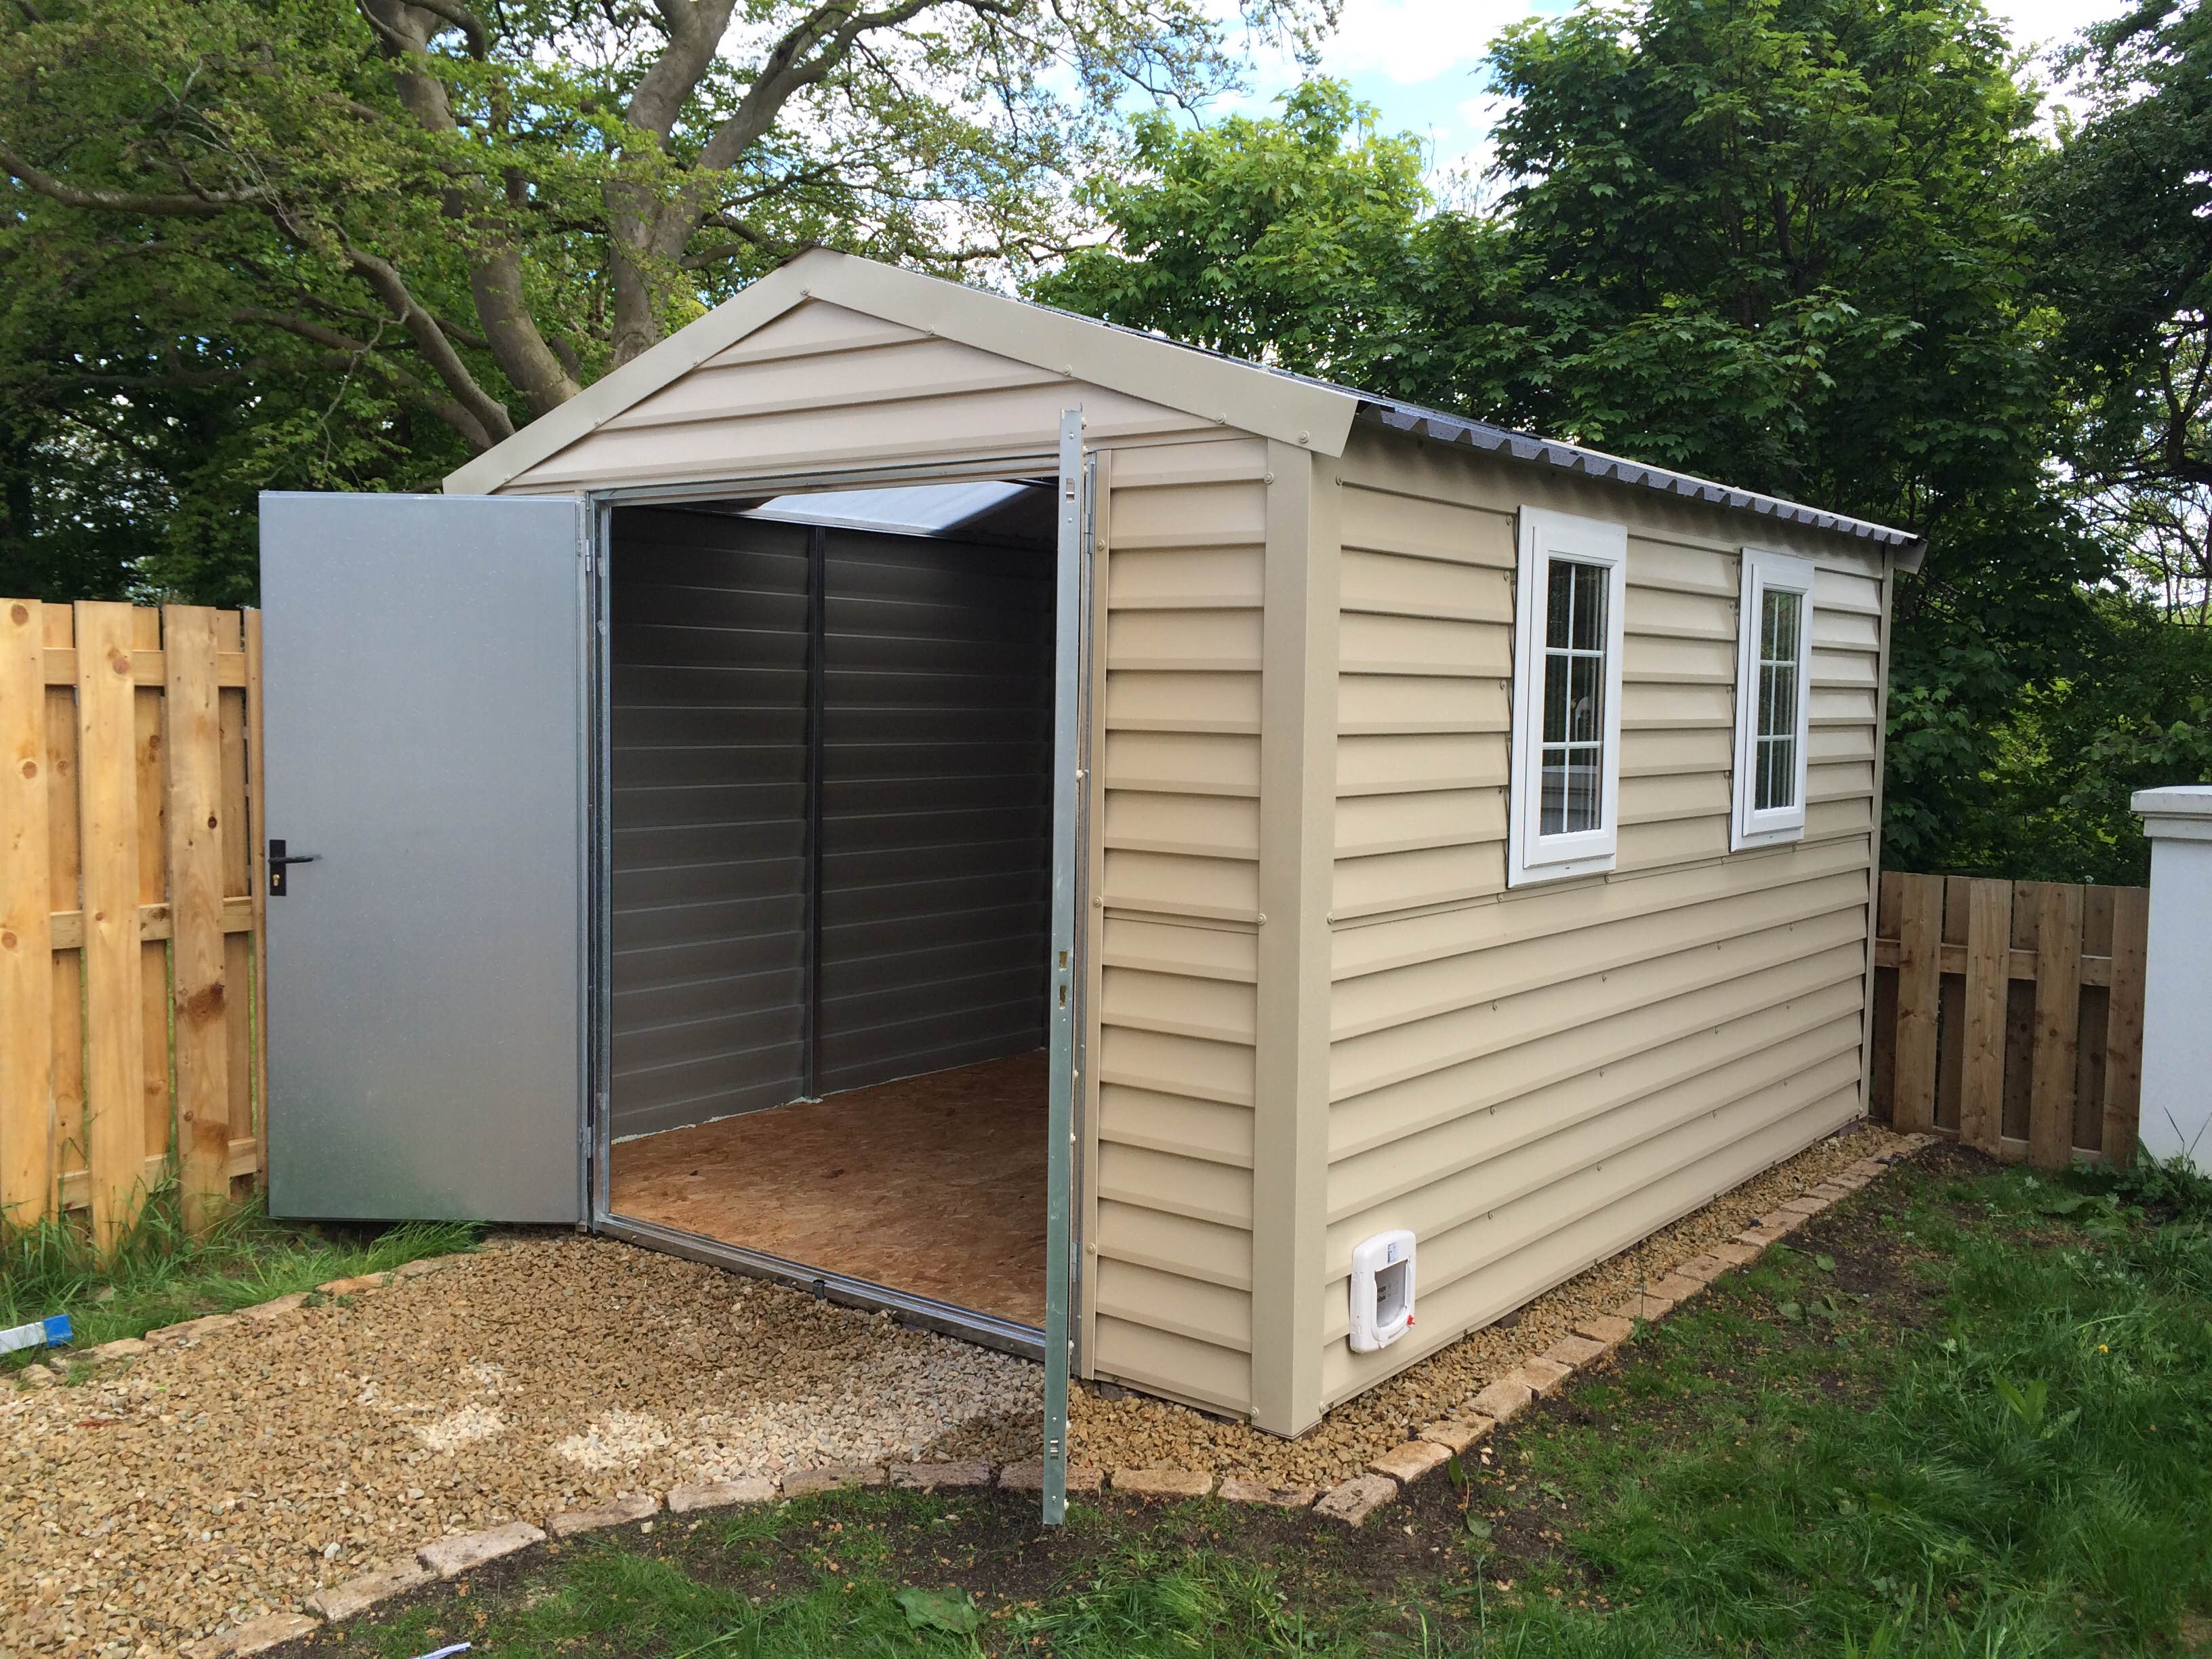 What to Look for when Buying a Garden Shed - Consider 